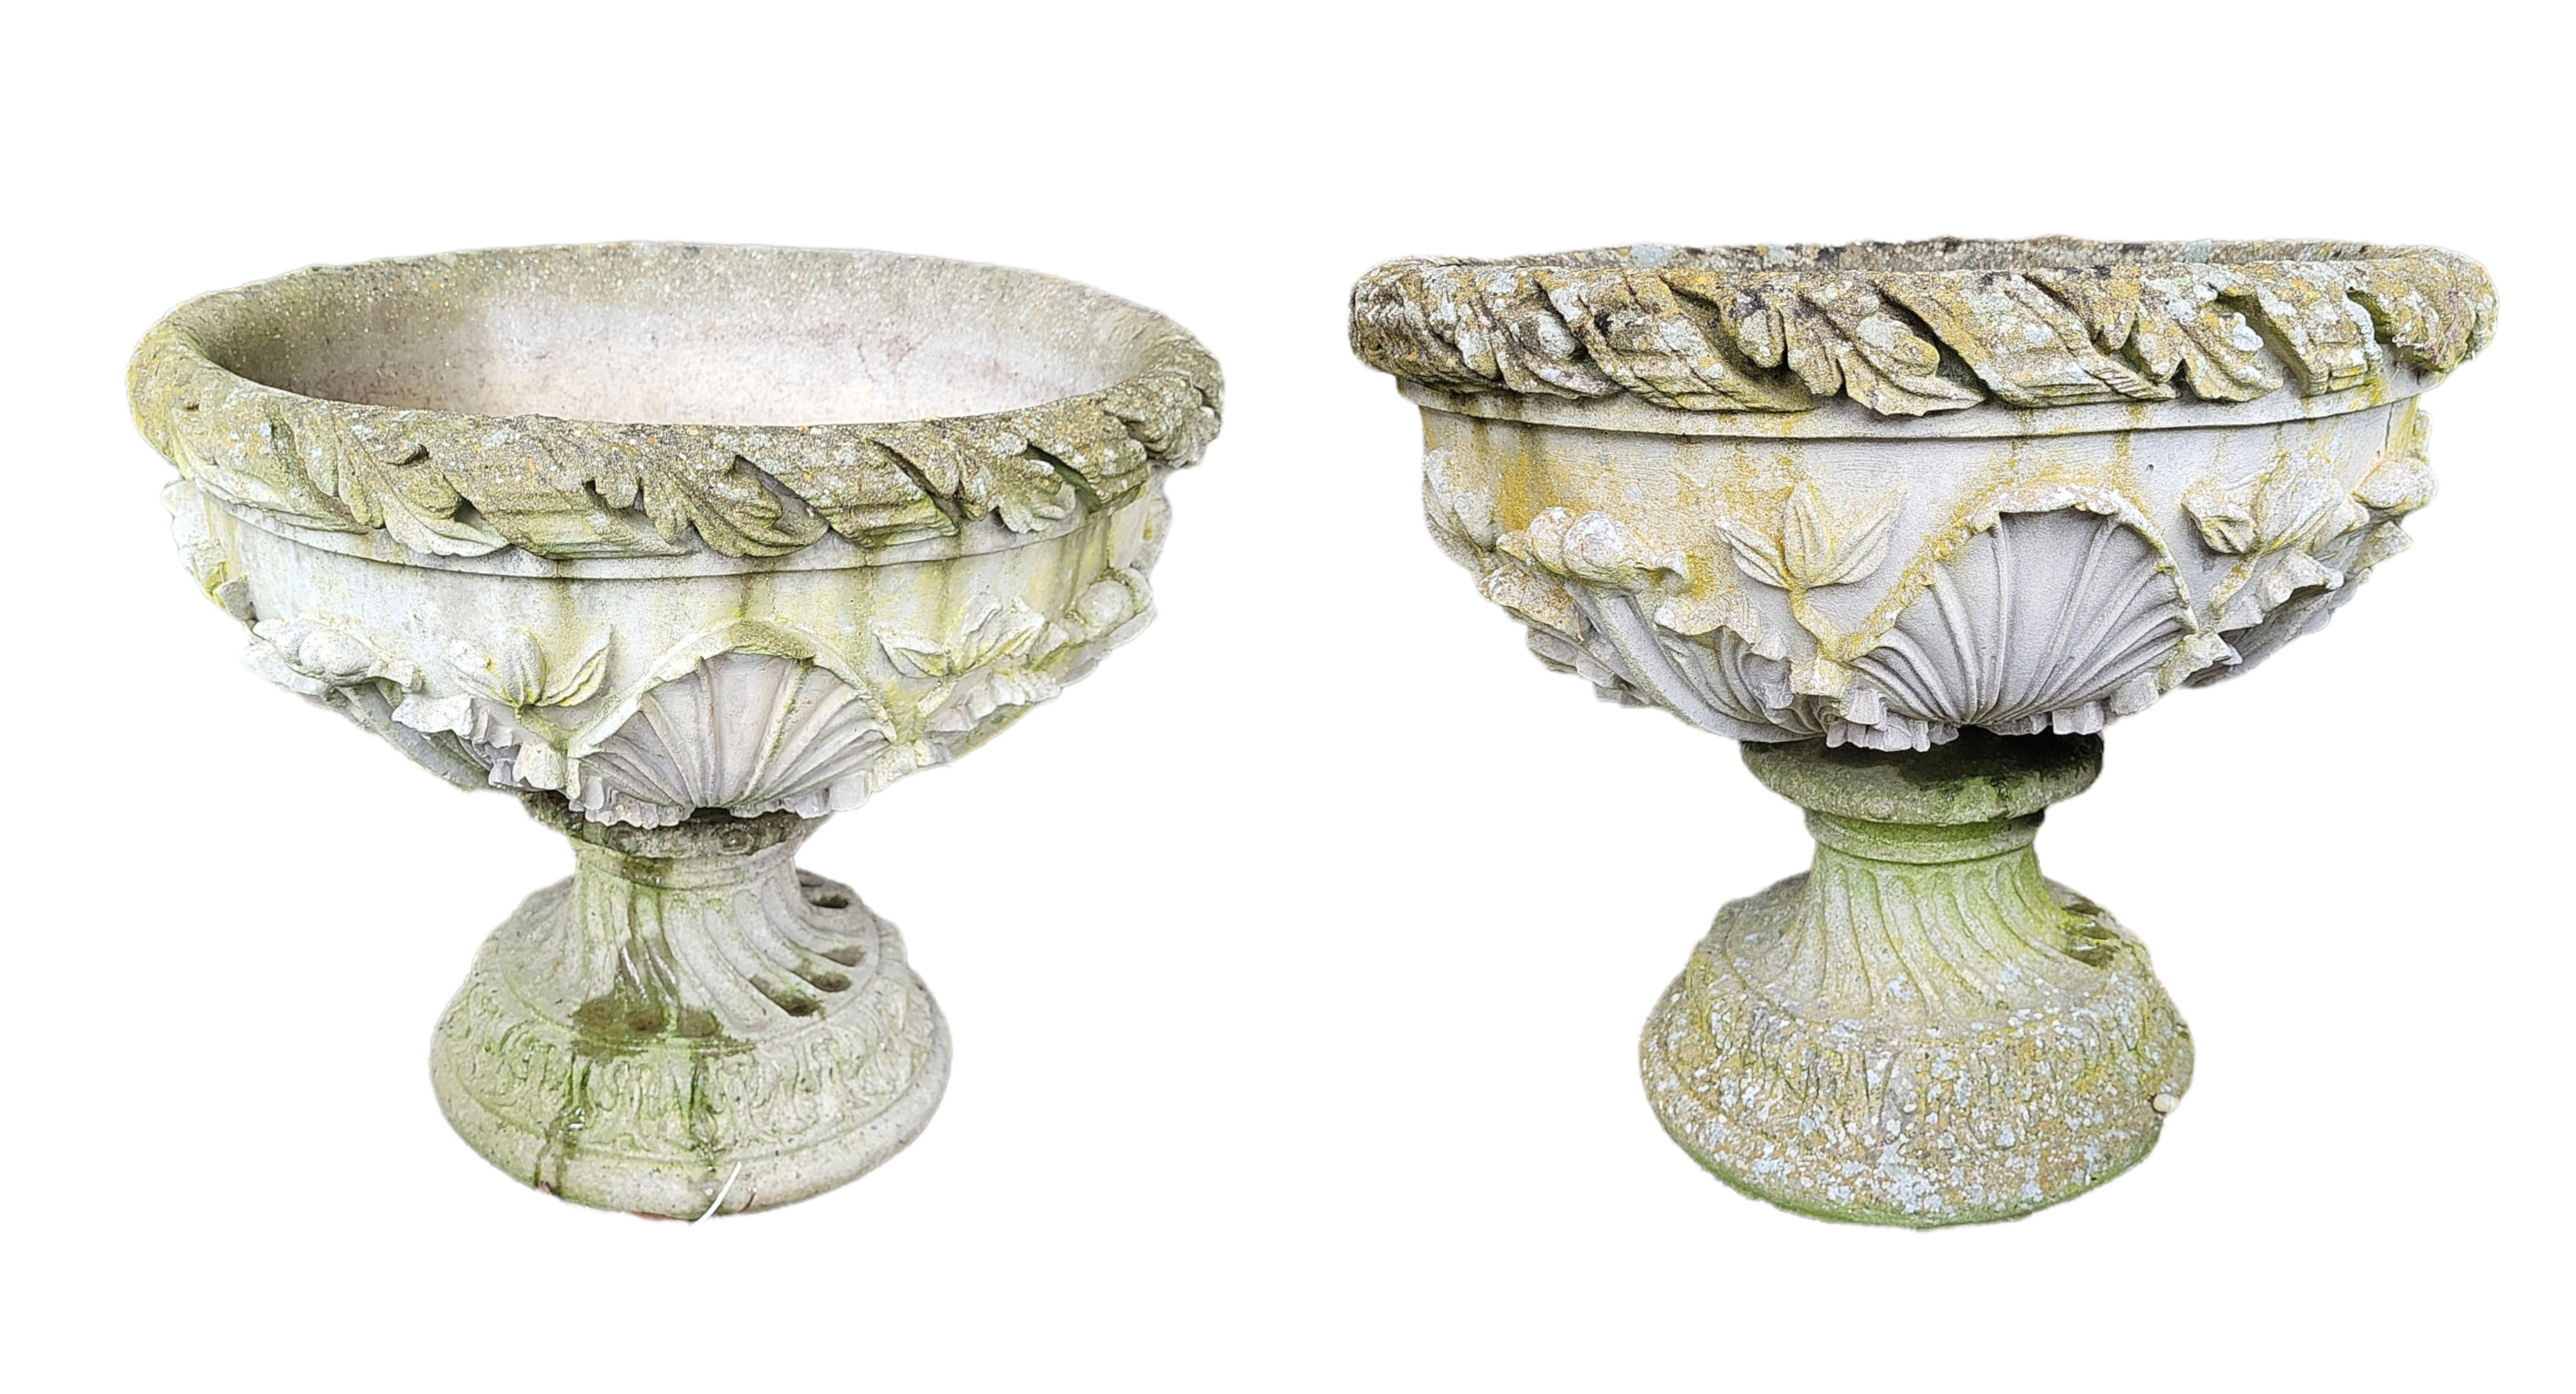 A PAIR OF RECONSTITUTED STONE PLANTERS With shell and leaf decoration. (w 54cm x h 49cm)